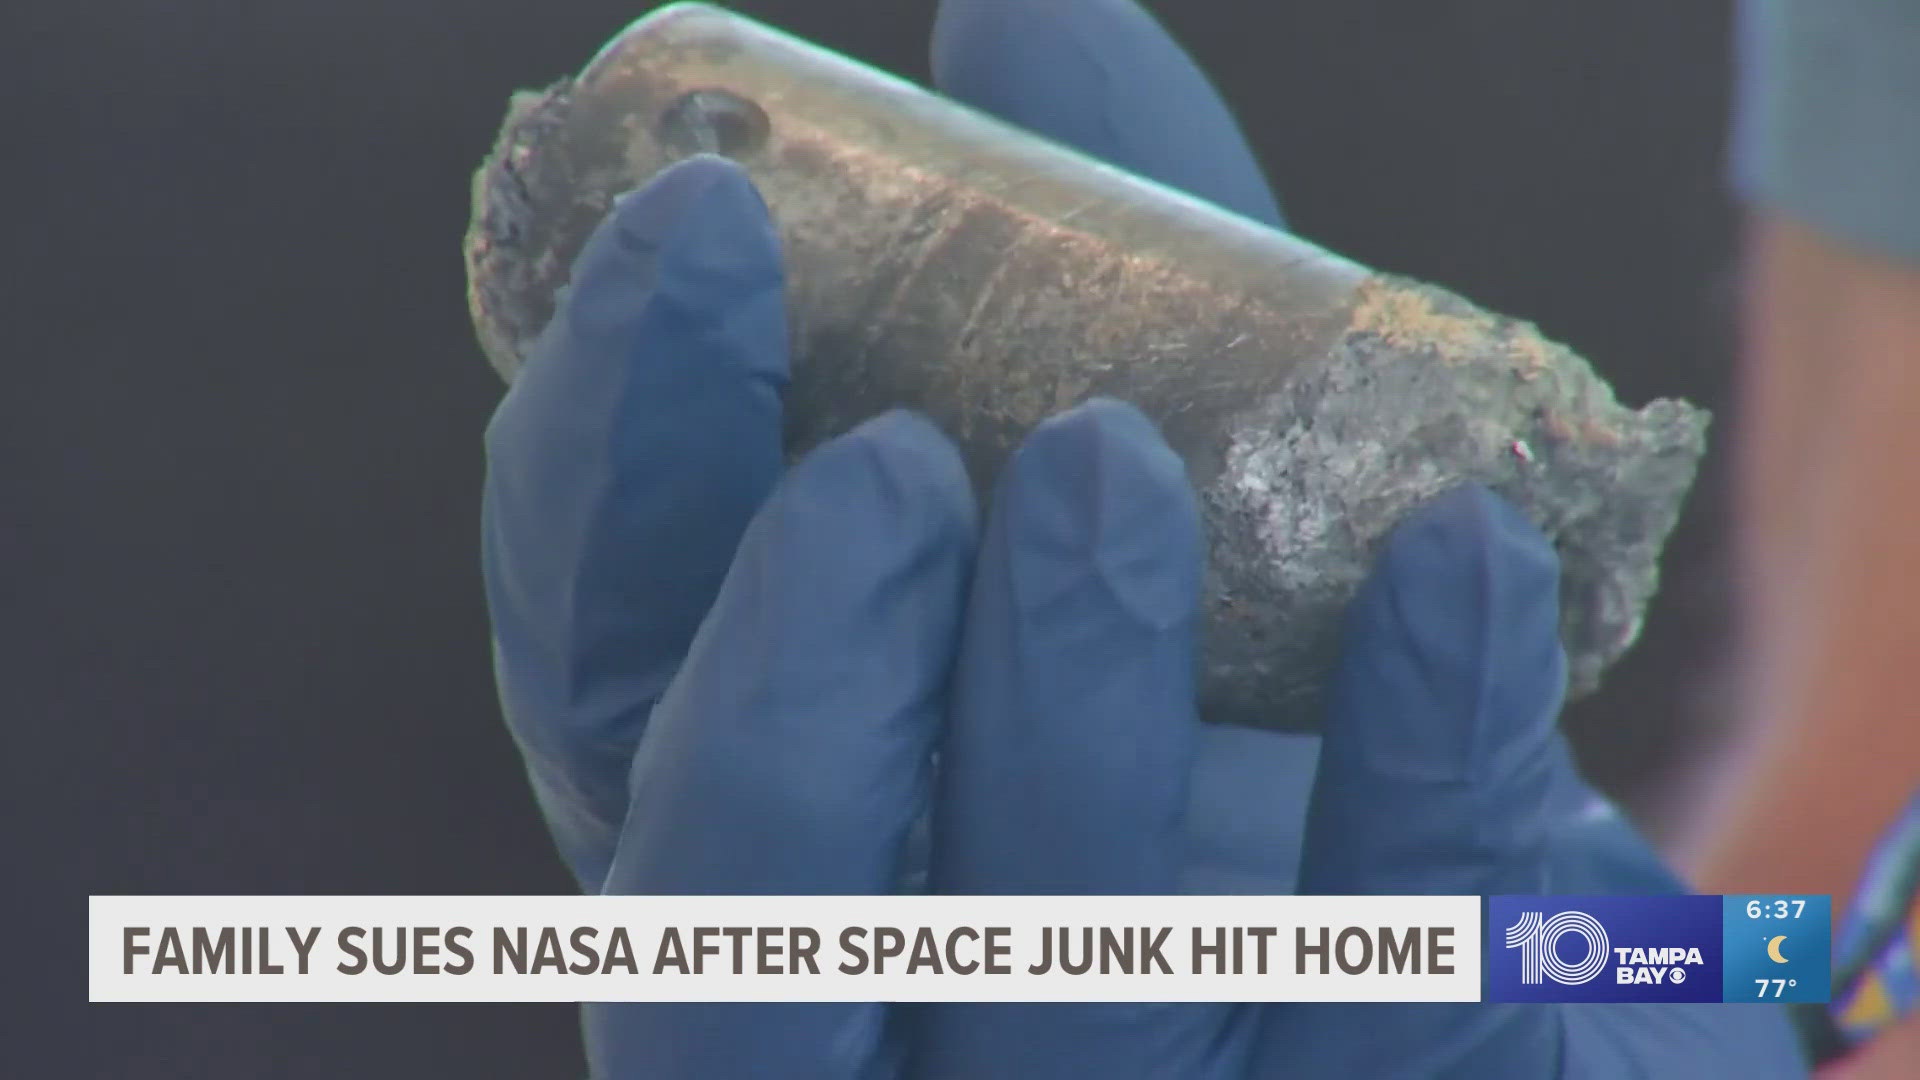 A Florida family is suing NASA for damages after a chunk of space junk from the International Space Station (ISS) tore through their roof.